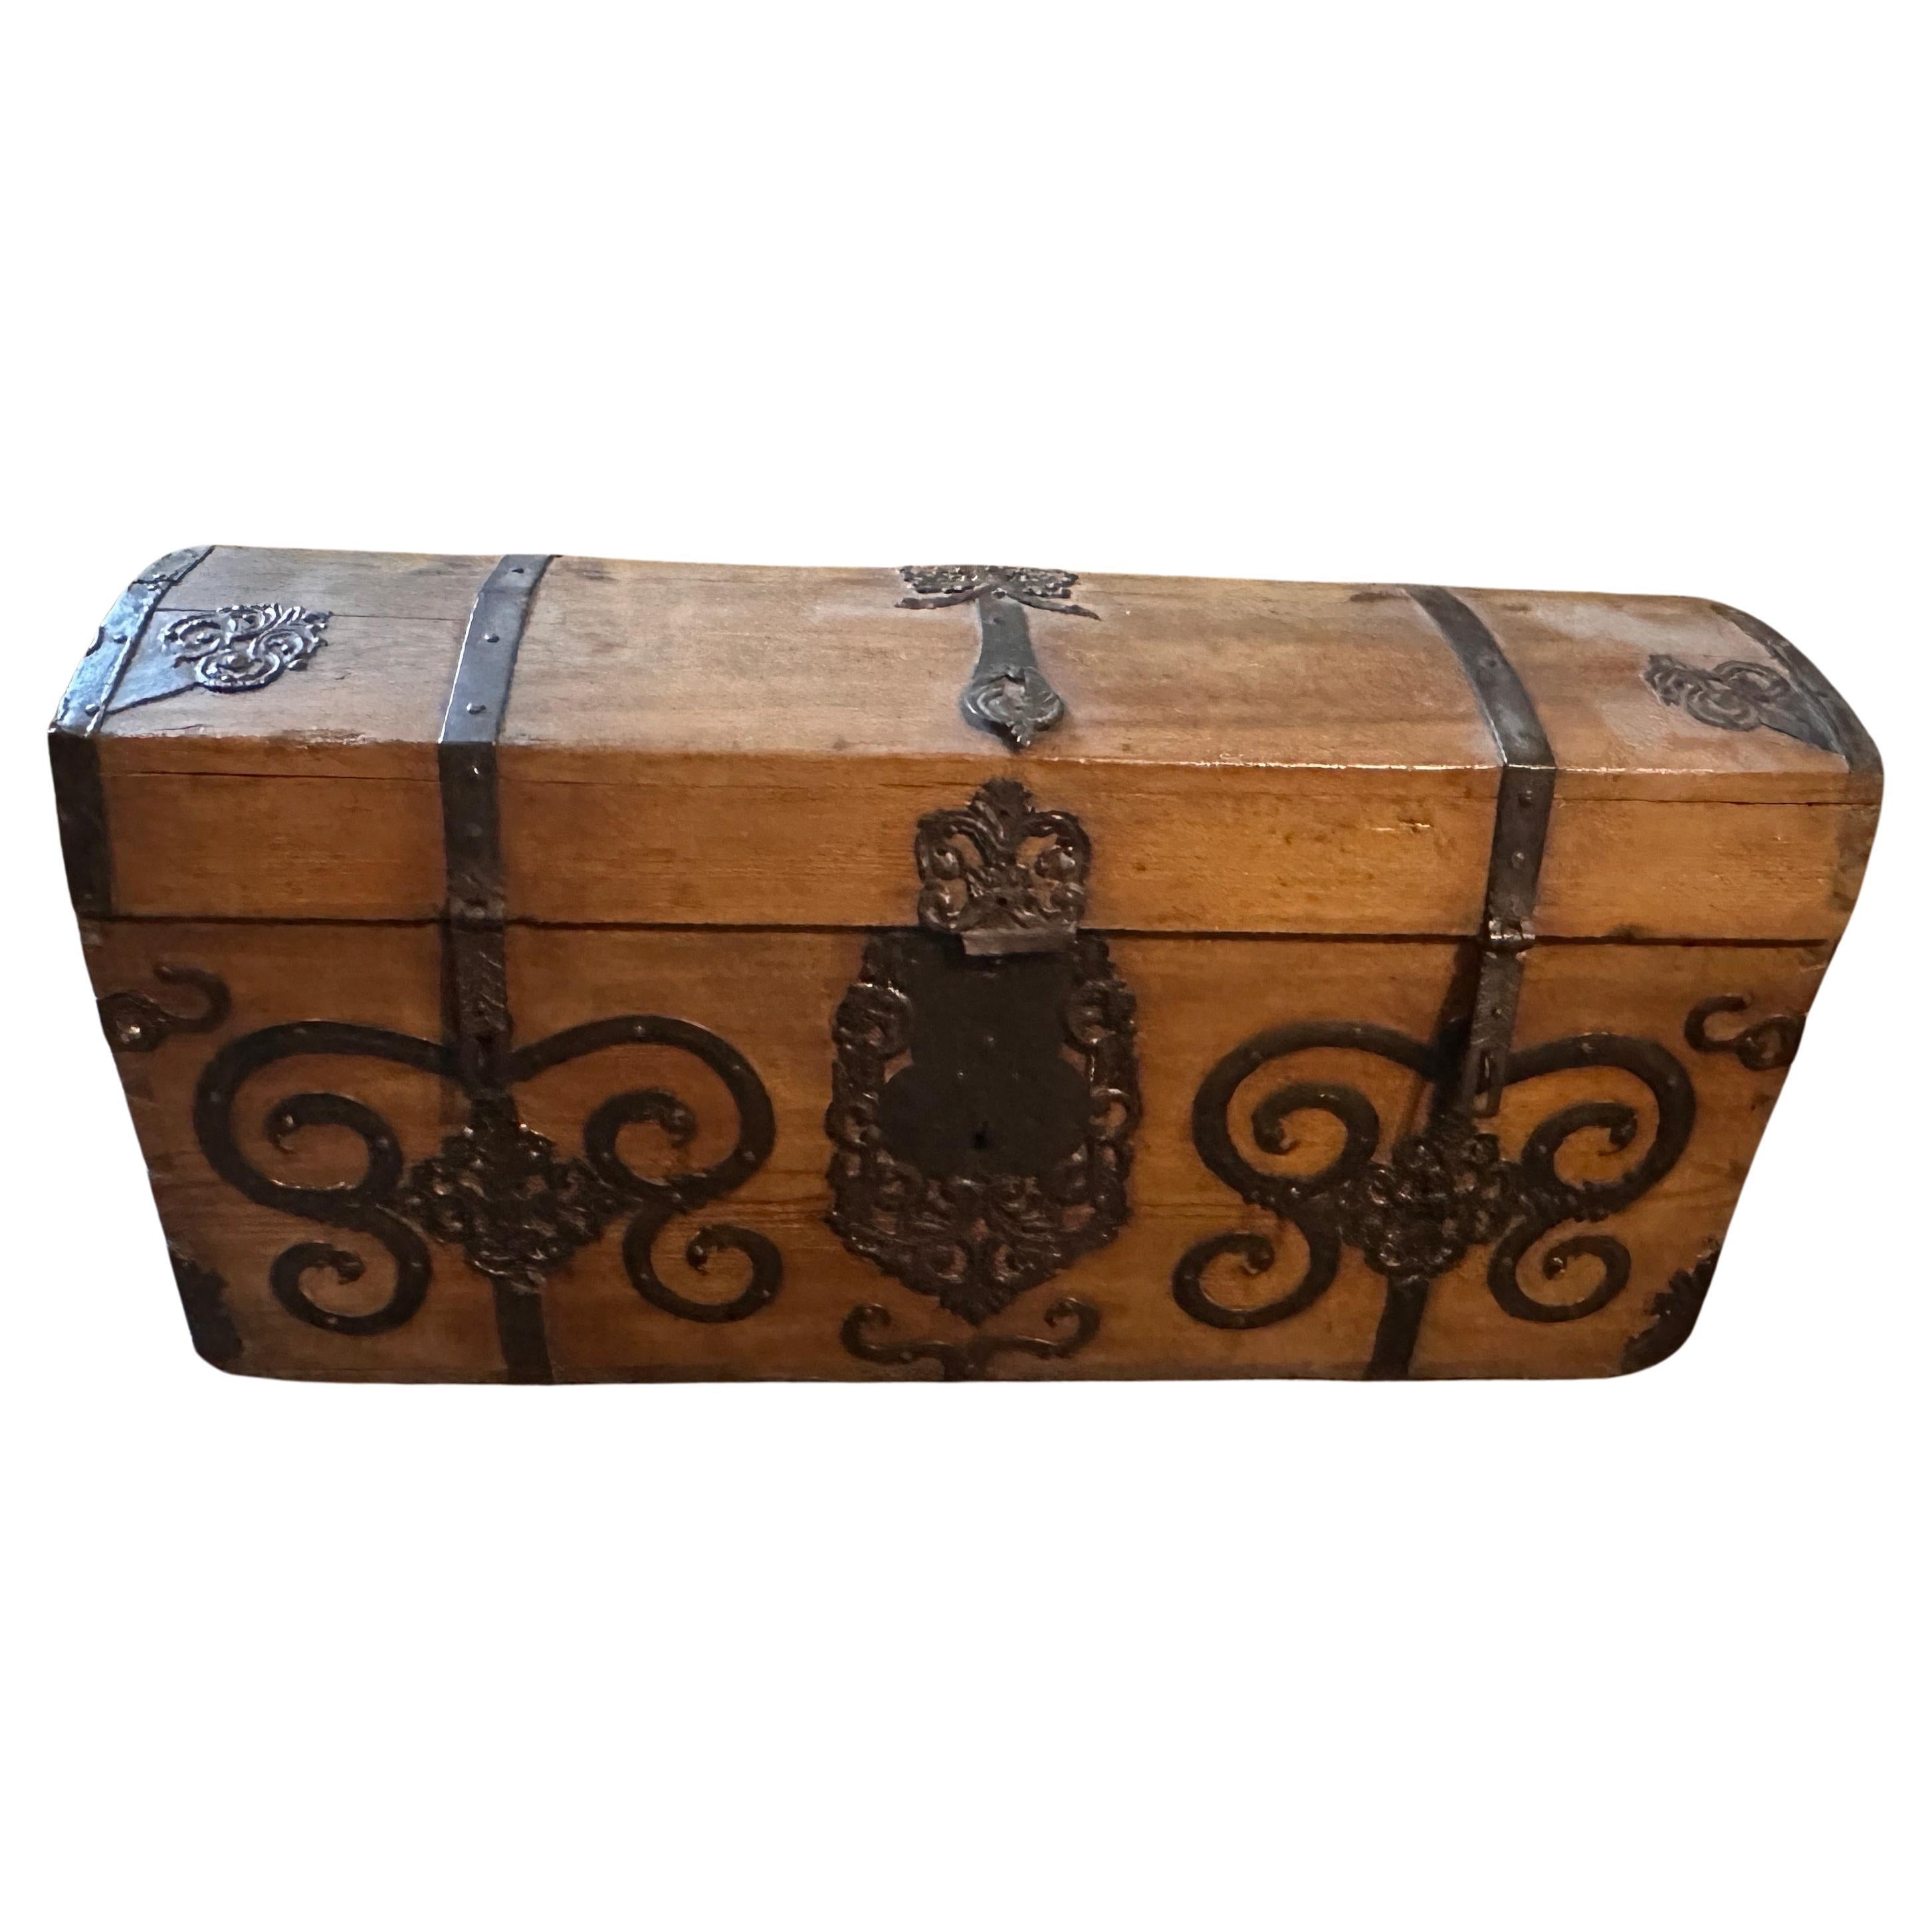 A Spanish Noble Carriage Trunk Dated on the top 1742 inside the iron family crest, it's in original condition. This carriage trunk dated 1742 it's a remarkable and historically significant piece of furniture that combines the craftsmanship and